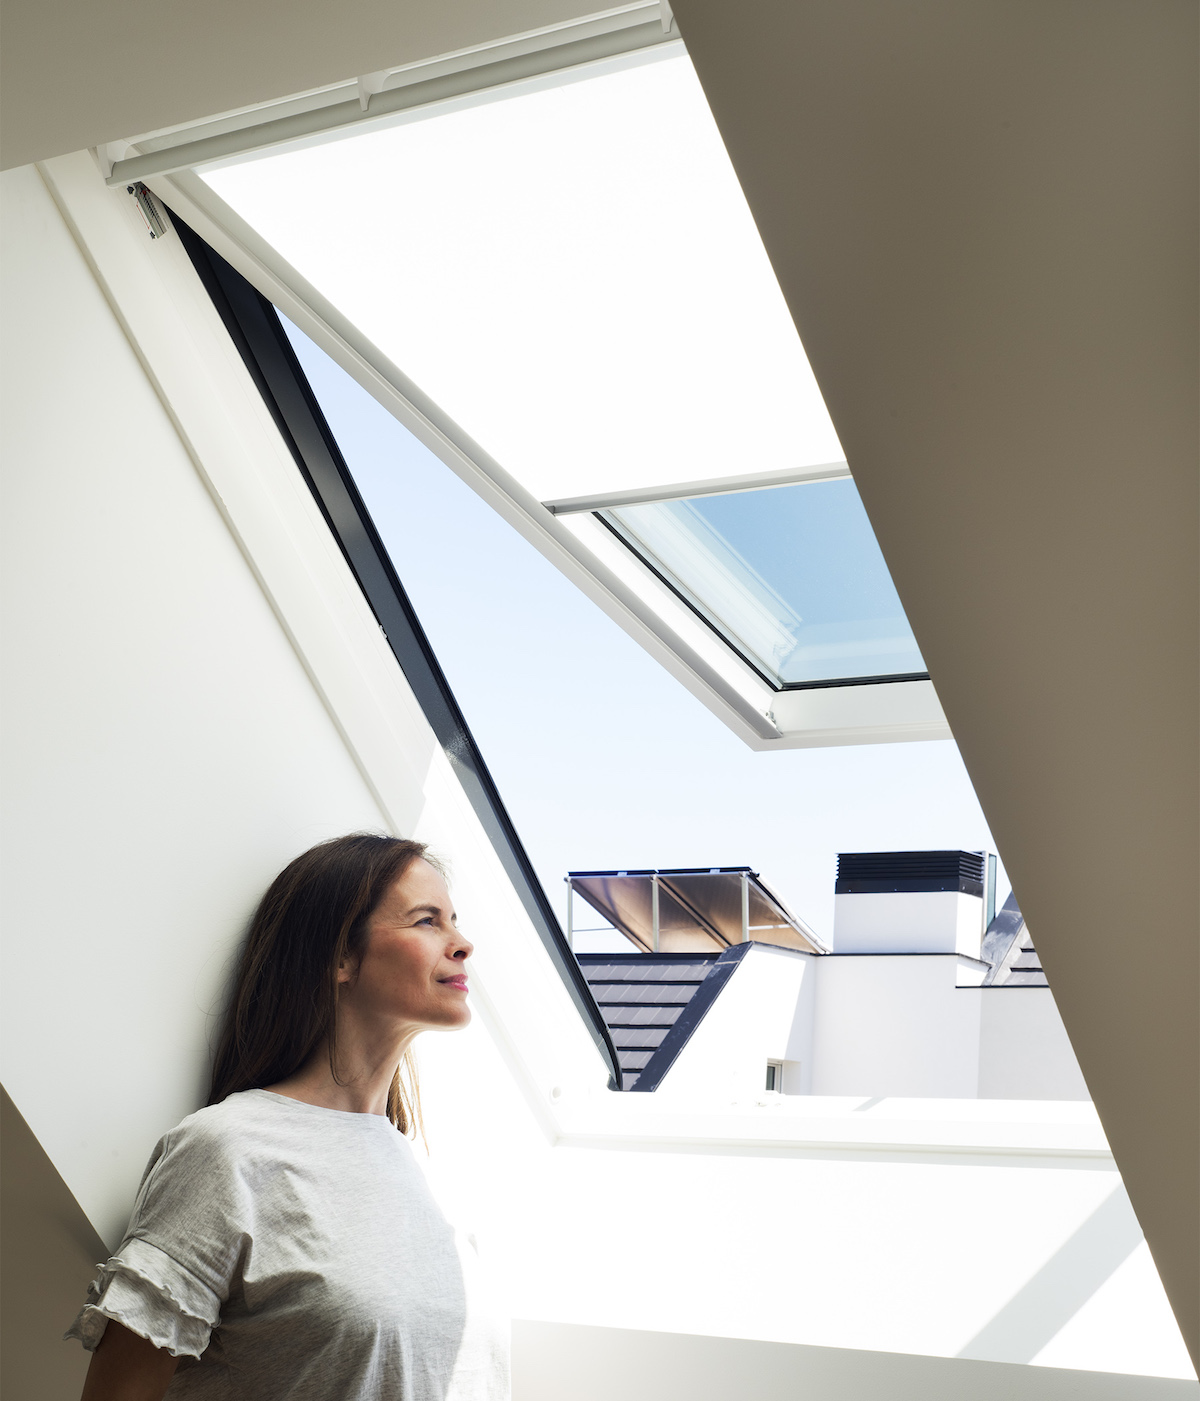  Velux GPL roof window admits natural light and fresh air while maximizing outdoor views